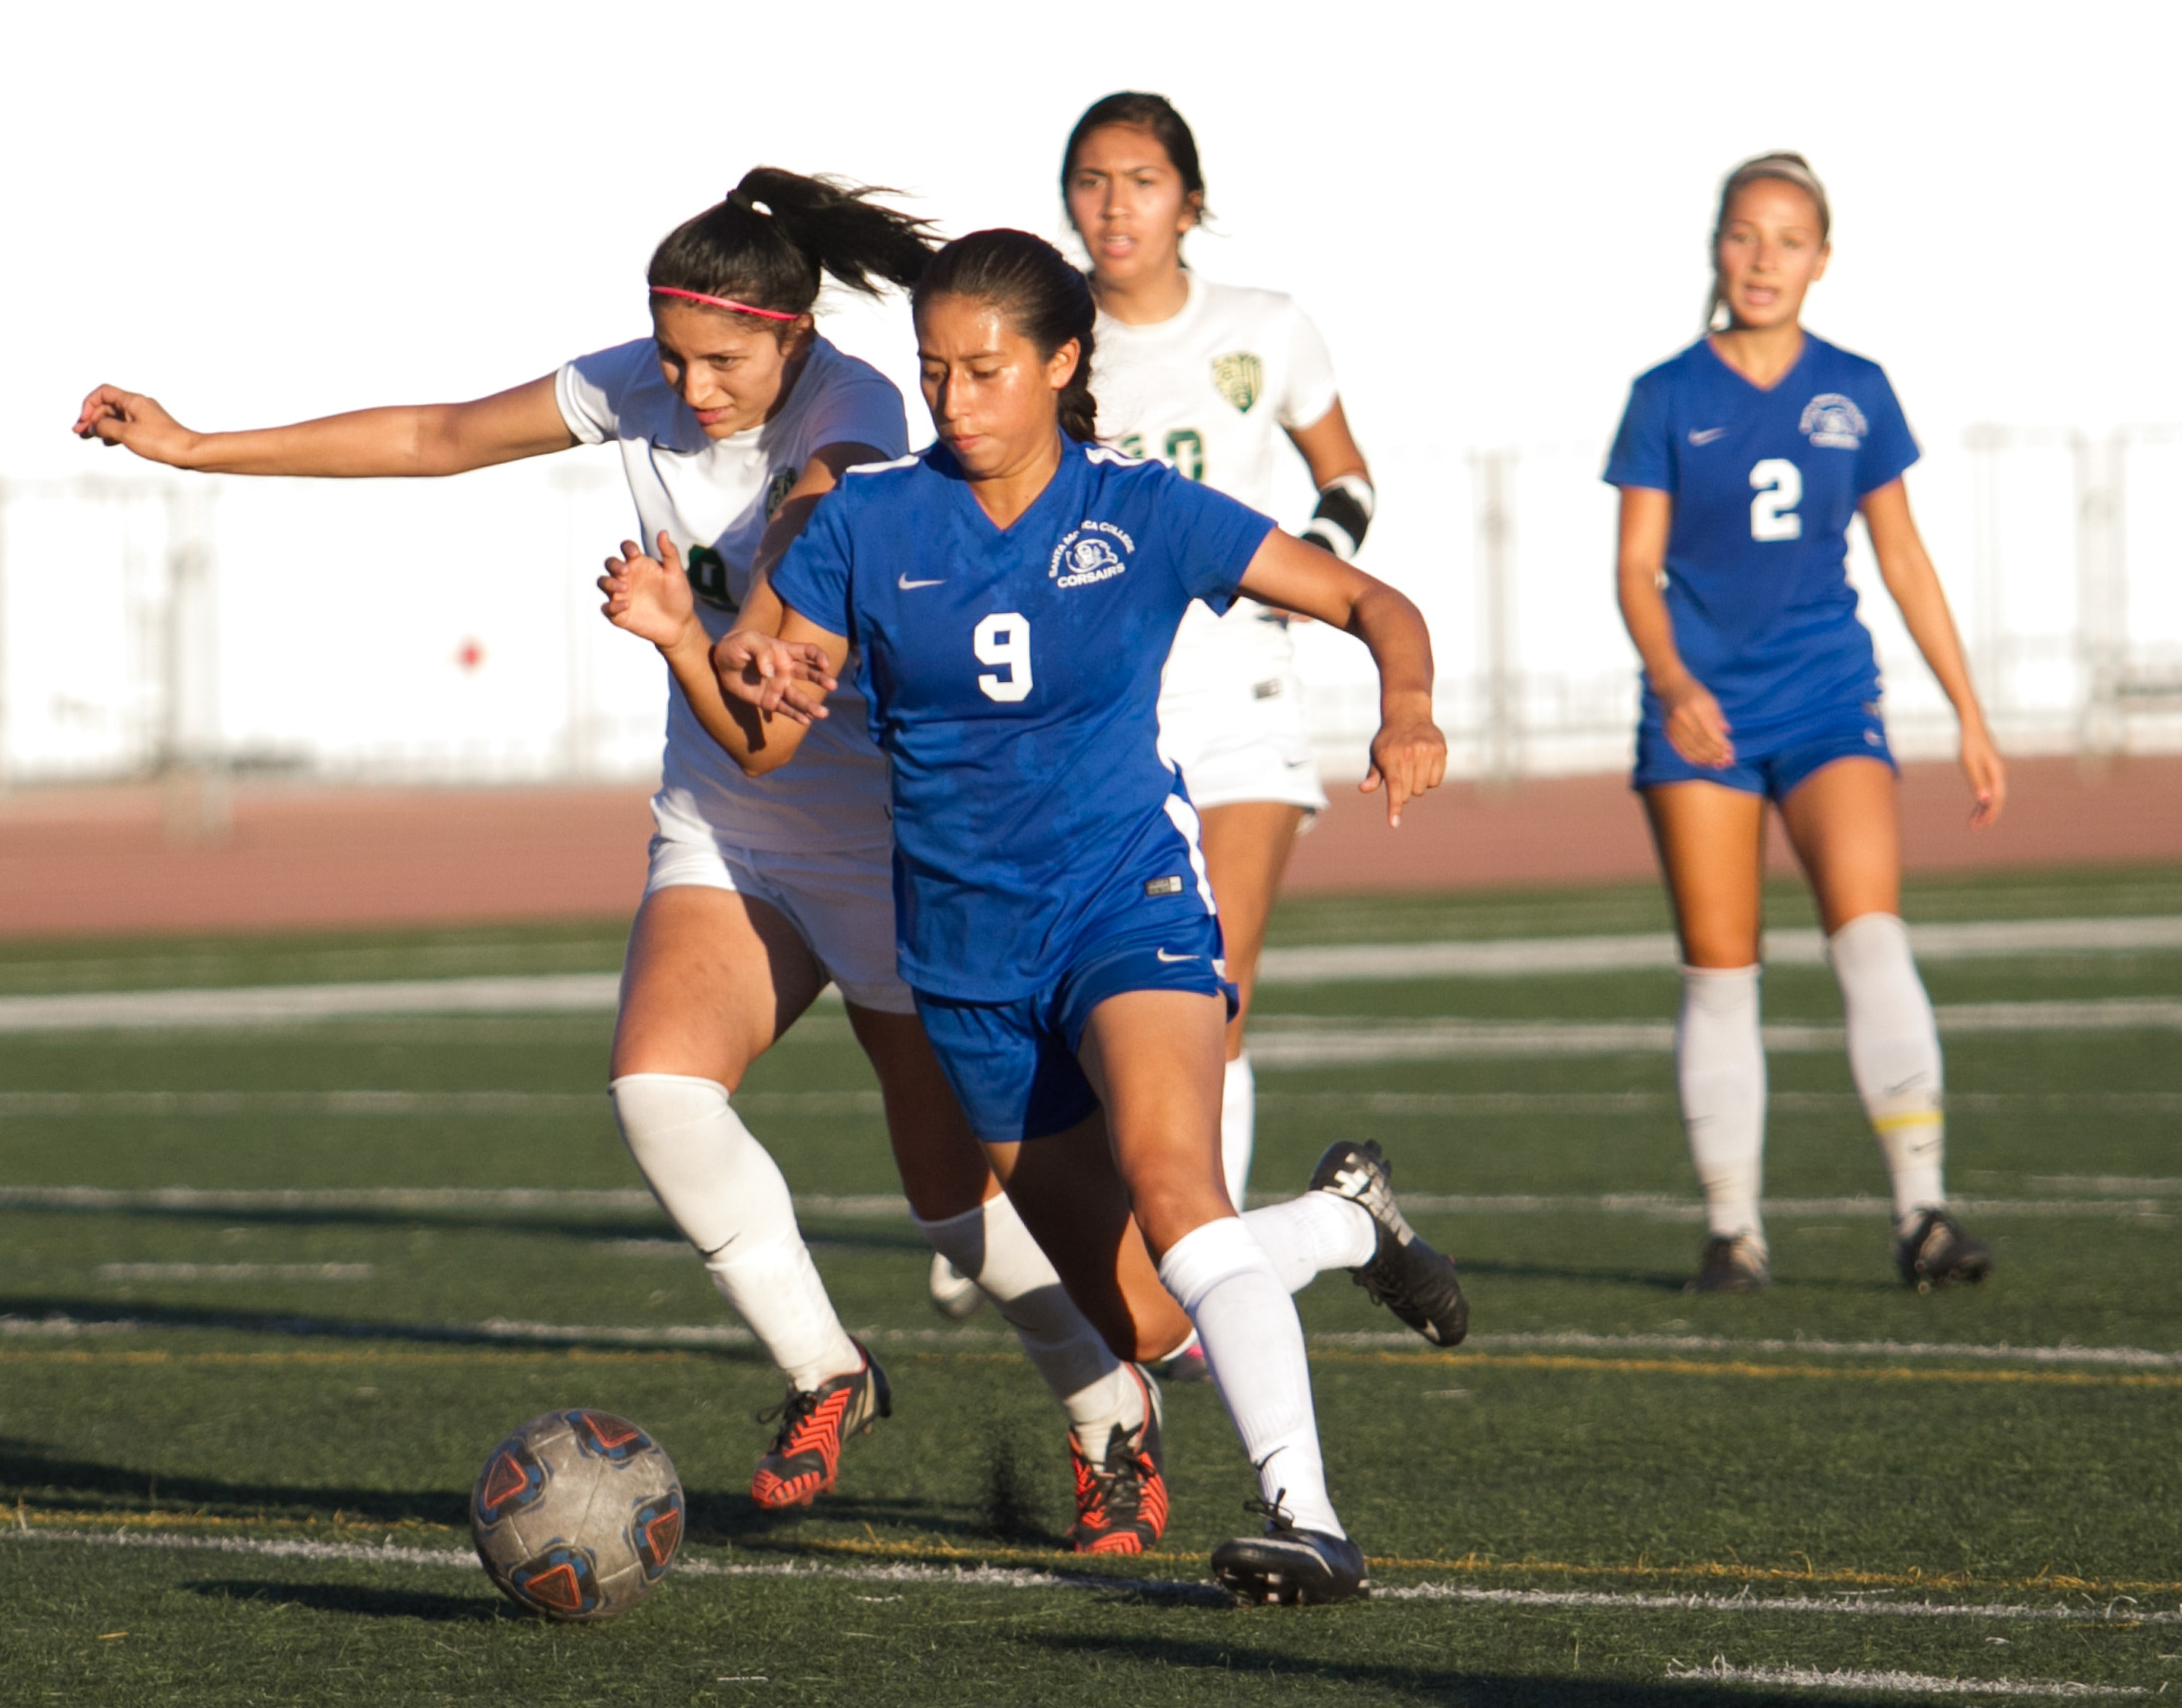  Santa Monica College Corsair Ashley Martinez (9)(R) fights for possession of the ball against LA Valley College Monarch Angie Aguirre (9)(L) on Tuesday, October 24, 2017, on the Corsair Field at Santa Monica College in Santa Monica, California. The 